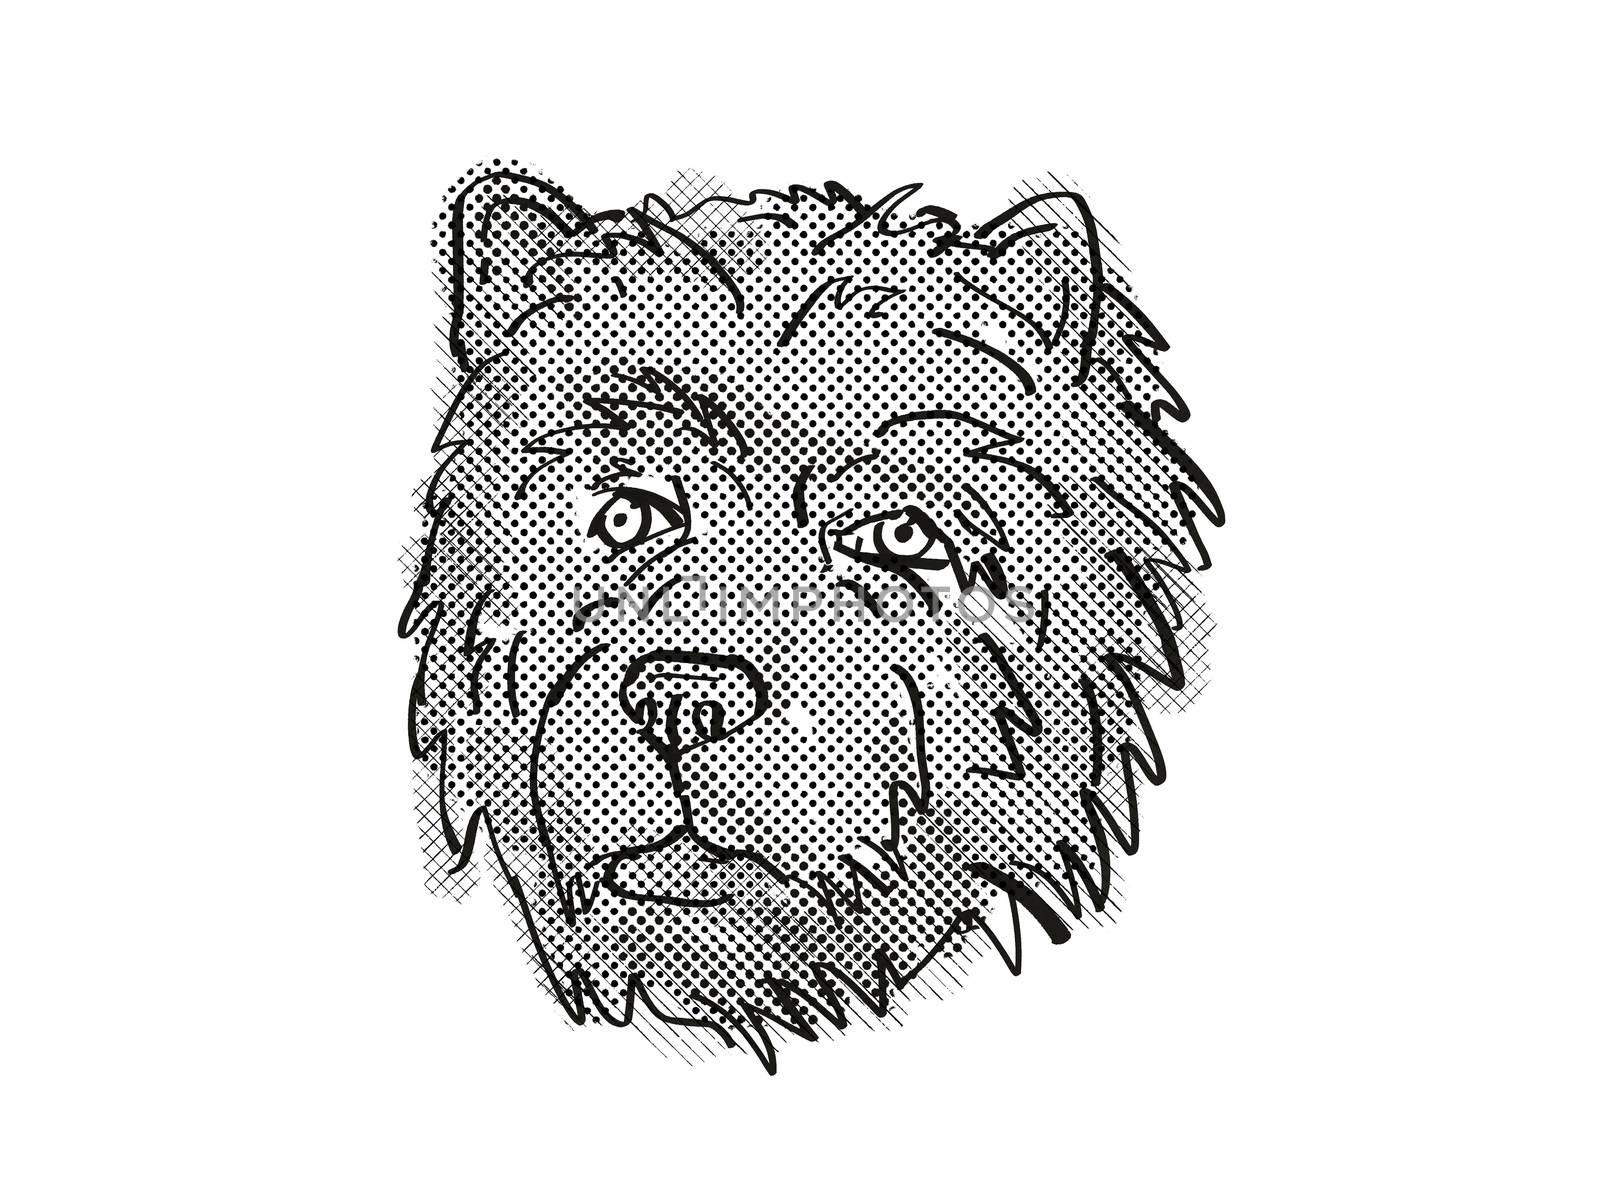 Retro cartoon style drawing of head of a Chow Chow, a domestic dog or canine breed on isolated white background done in black and white.